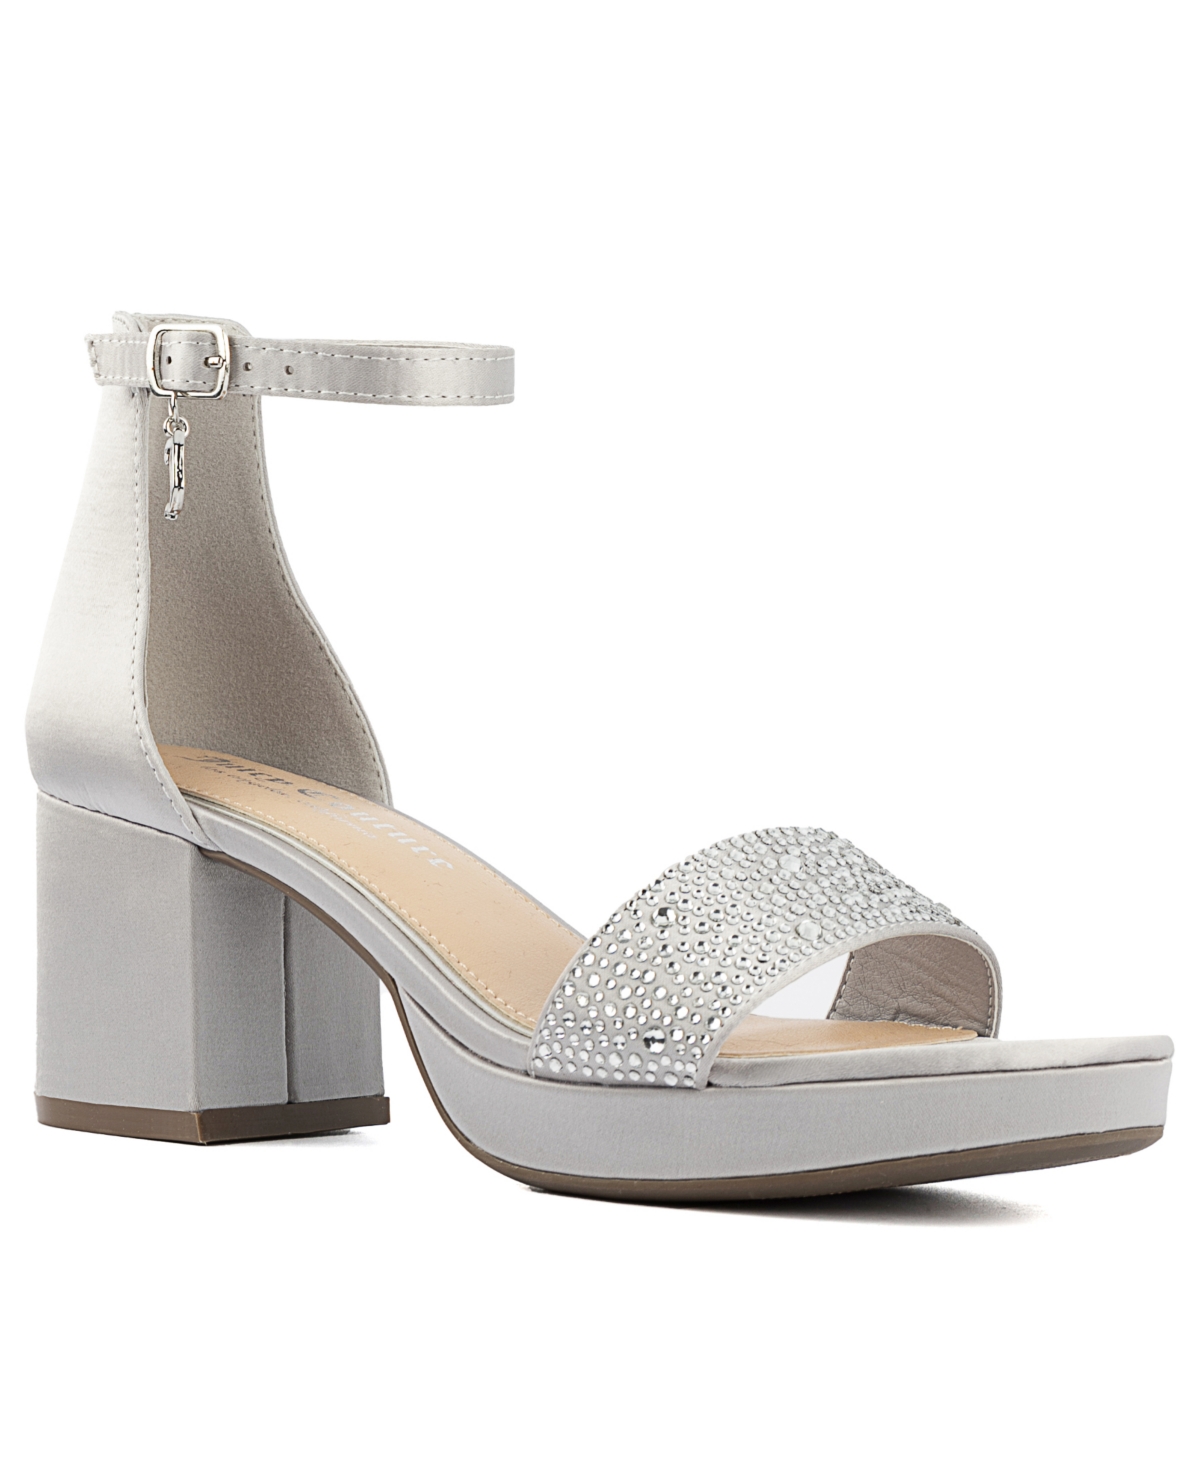 Juicy Couture Women's Nelly Rhinestone Two-piece Platform Dress Sandals In Silver Satin